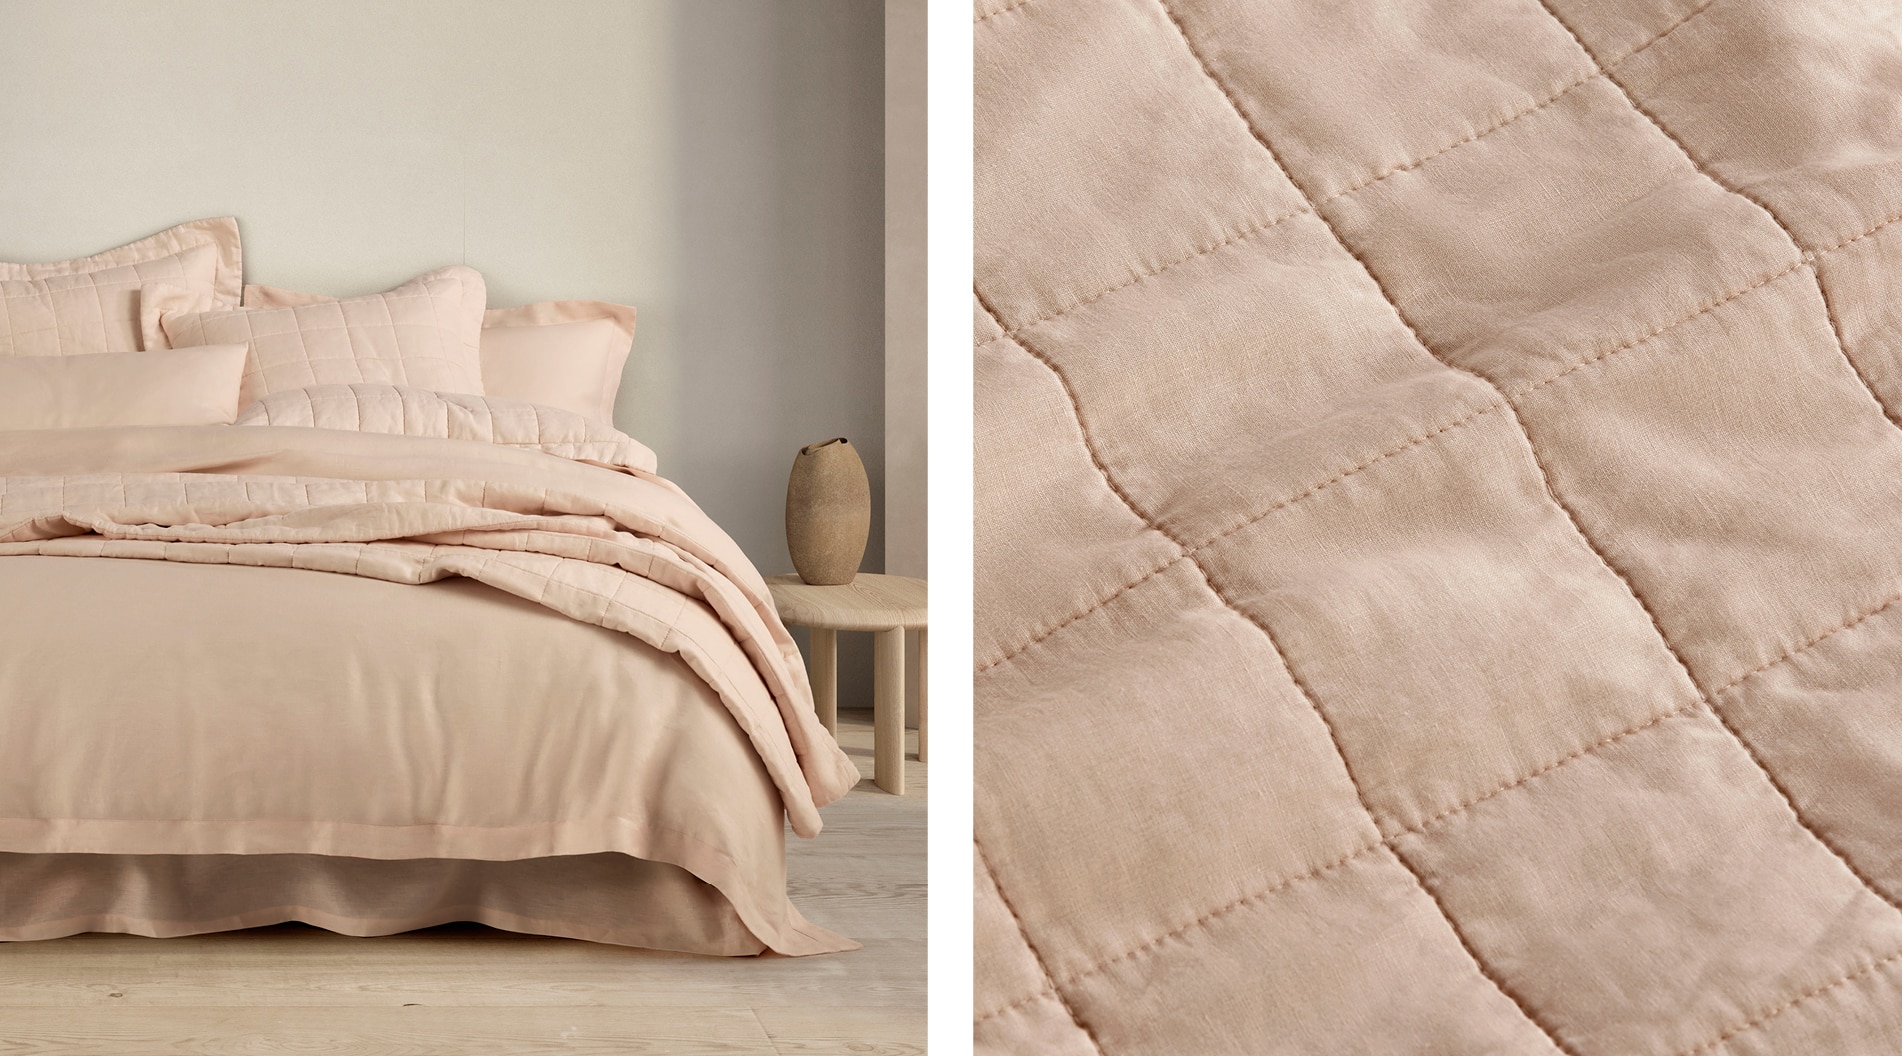 split image. left hand side, bed dressed in belgian flax linen in the colour buff. includes flat sheet, quilt cover, bed cover and pillows, all layered. riht side, a close up of quilted linen bed cover, showing texture of belgian flax linen.